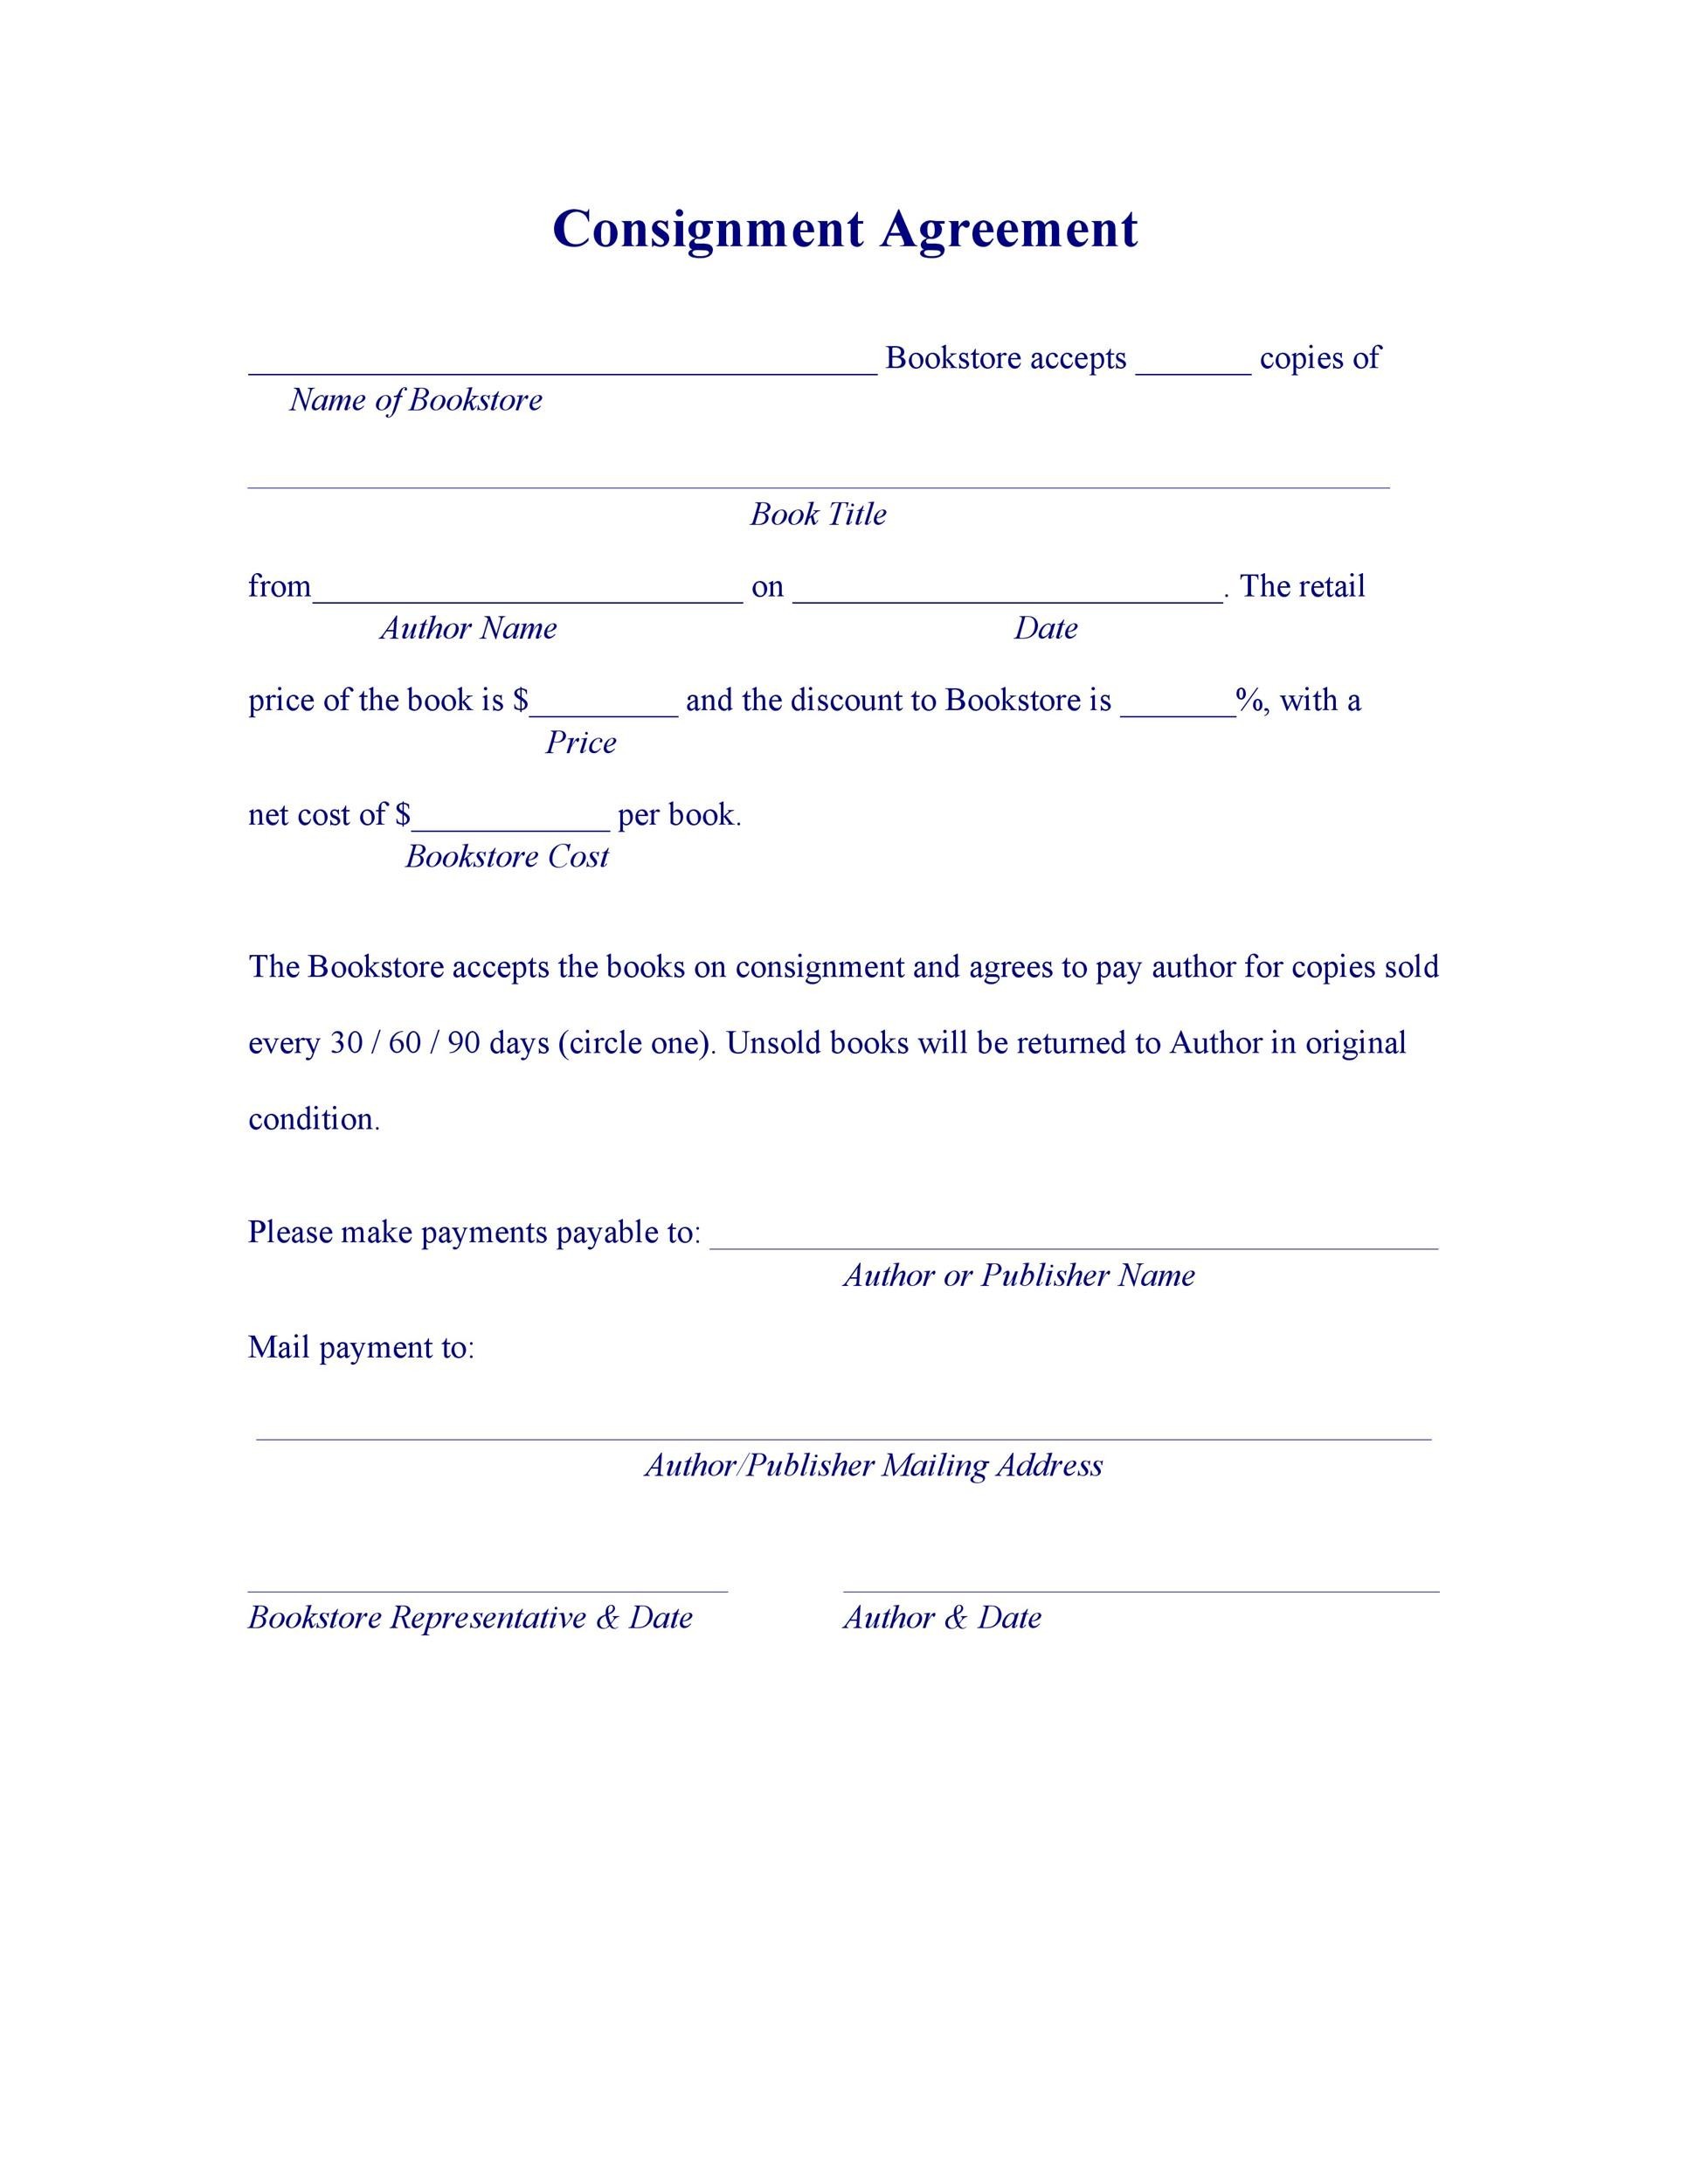 Free Consignment Agreement Template 35